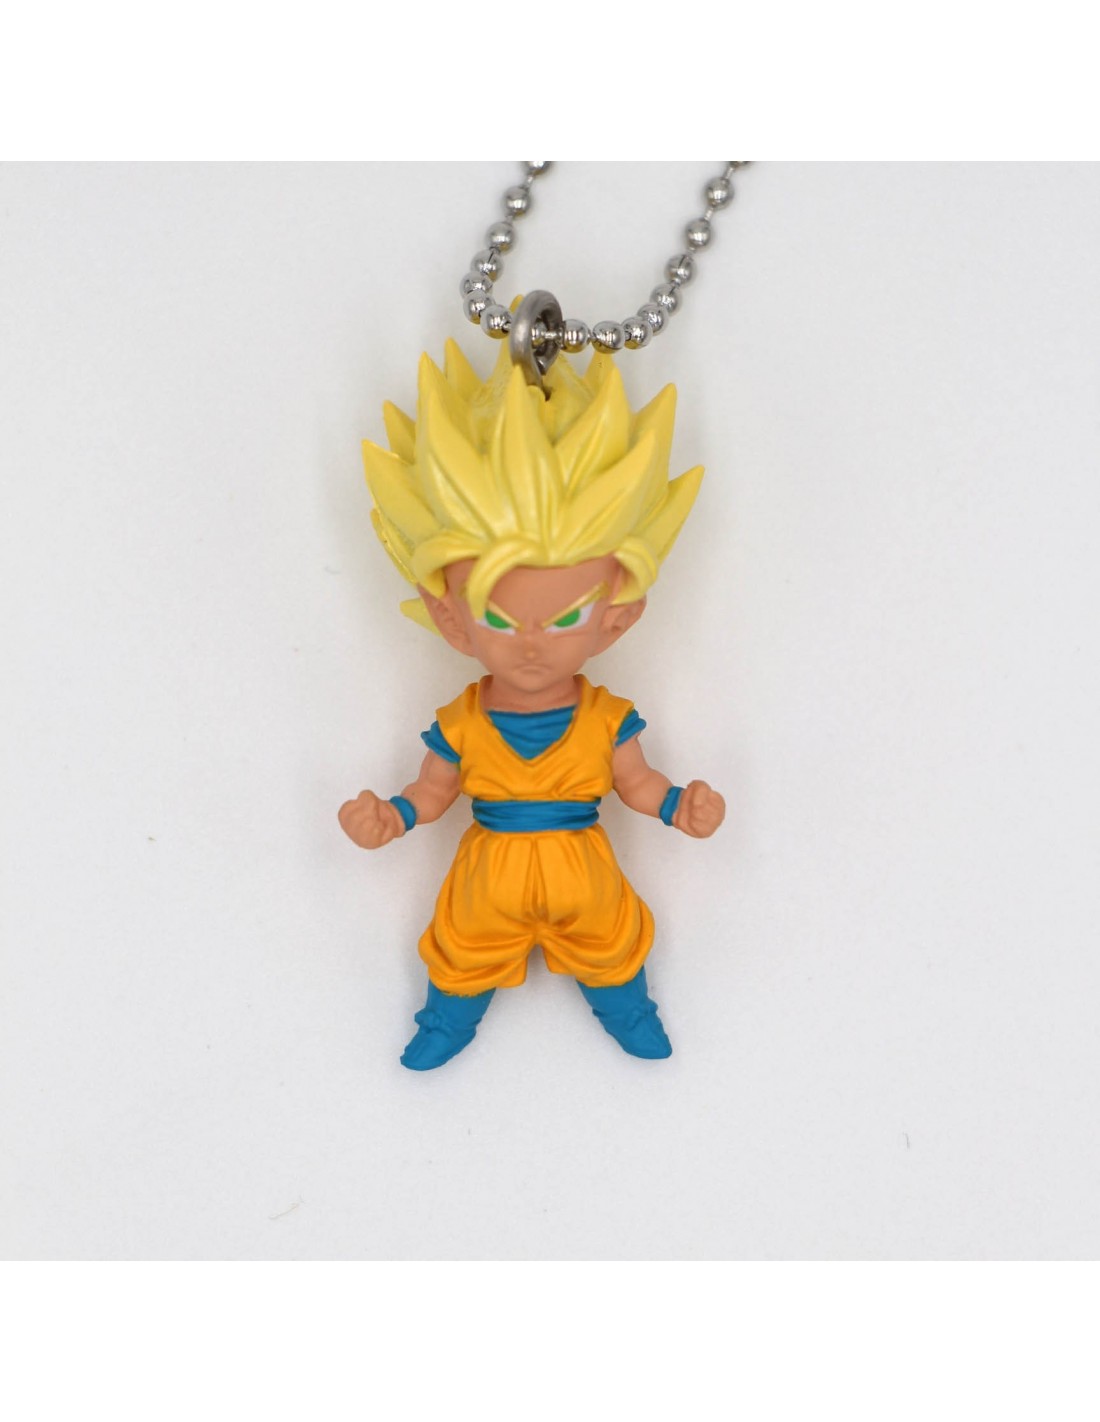 SS Goku / Colección: DRAGON BALL - UDM The Best Mix 03 (Keychain)